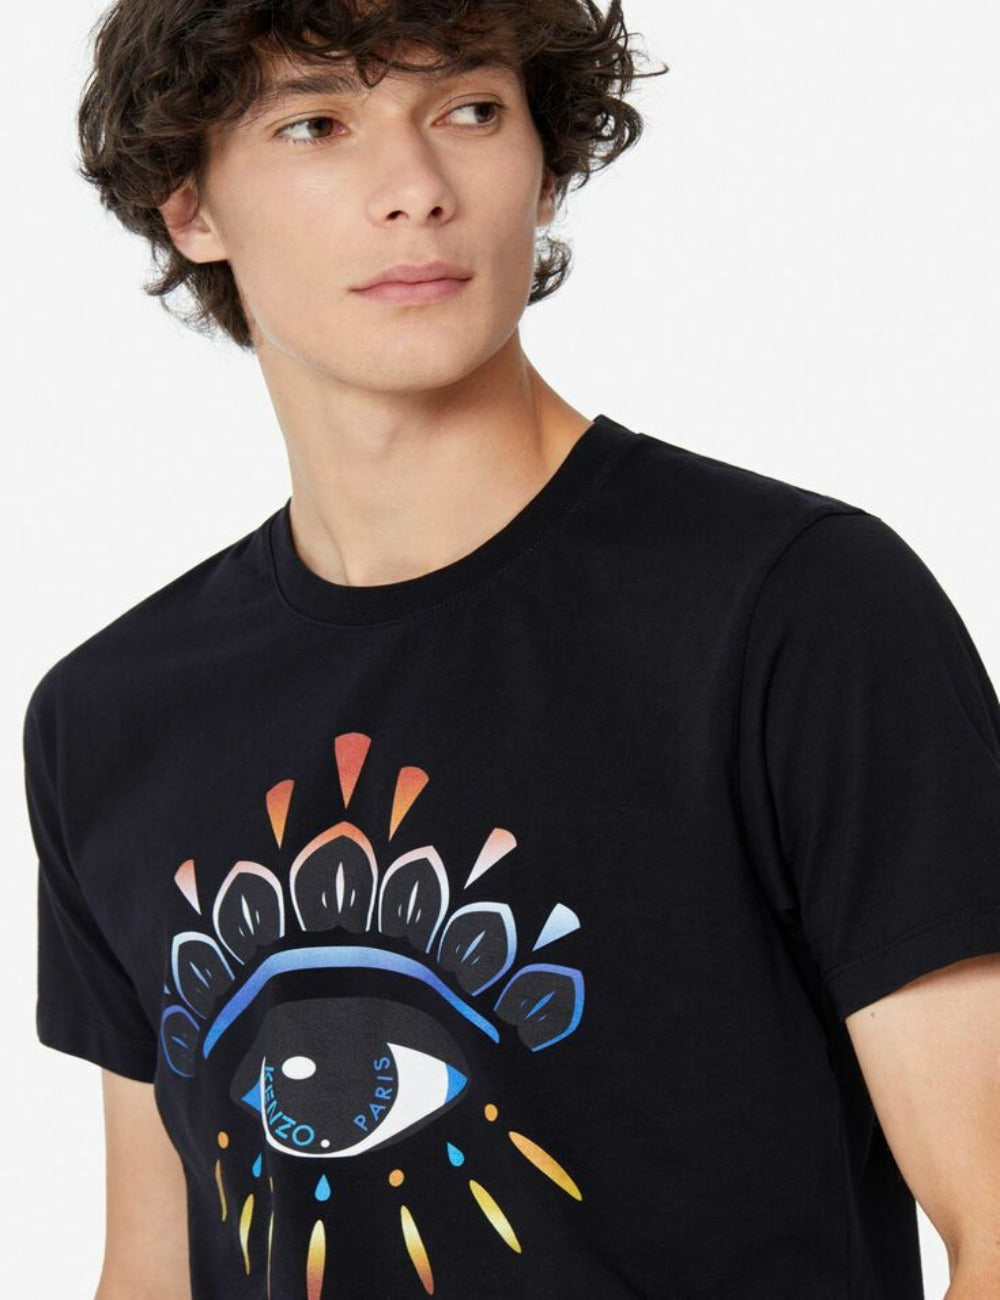 Kenzo Gradient Eye Logo T-Shirt - Shop Streetwear, Sneakers, Slippers and Gifts online | Malaysia - The Factory KL